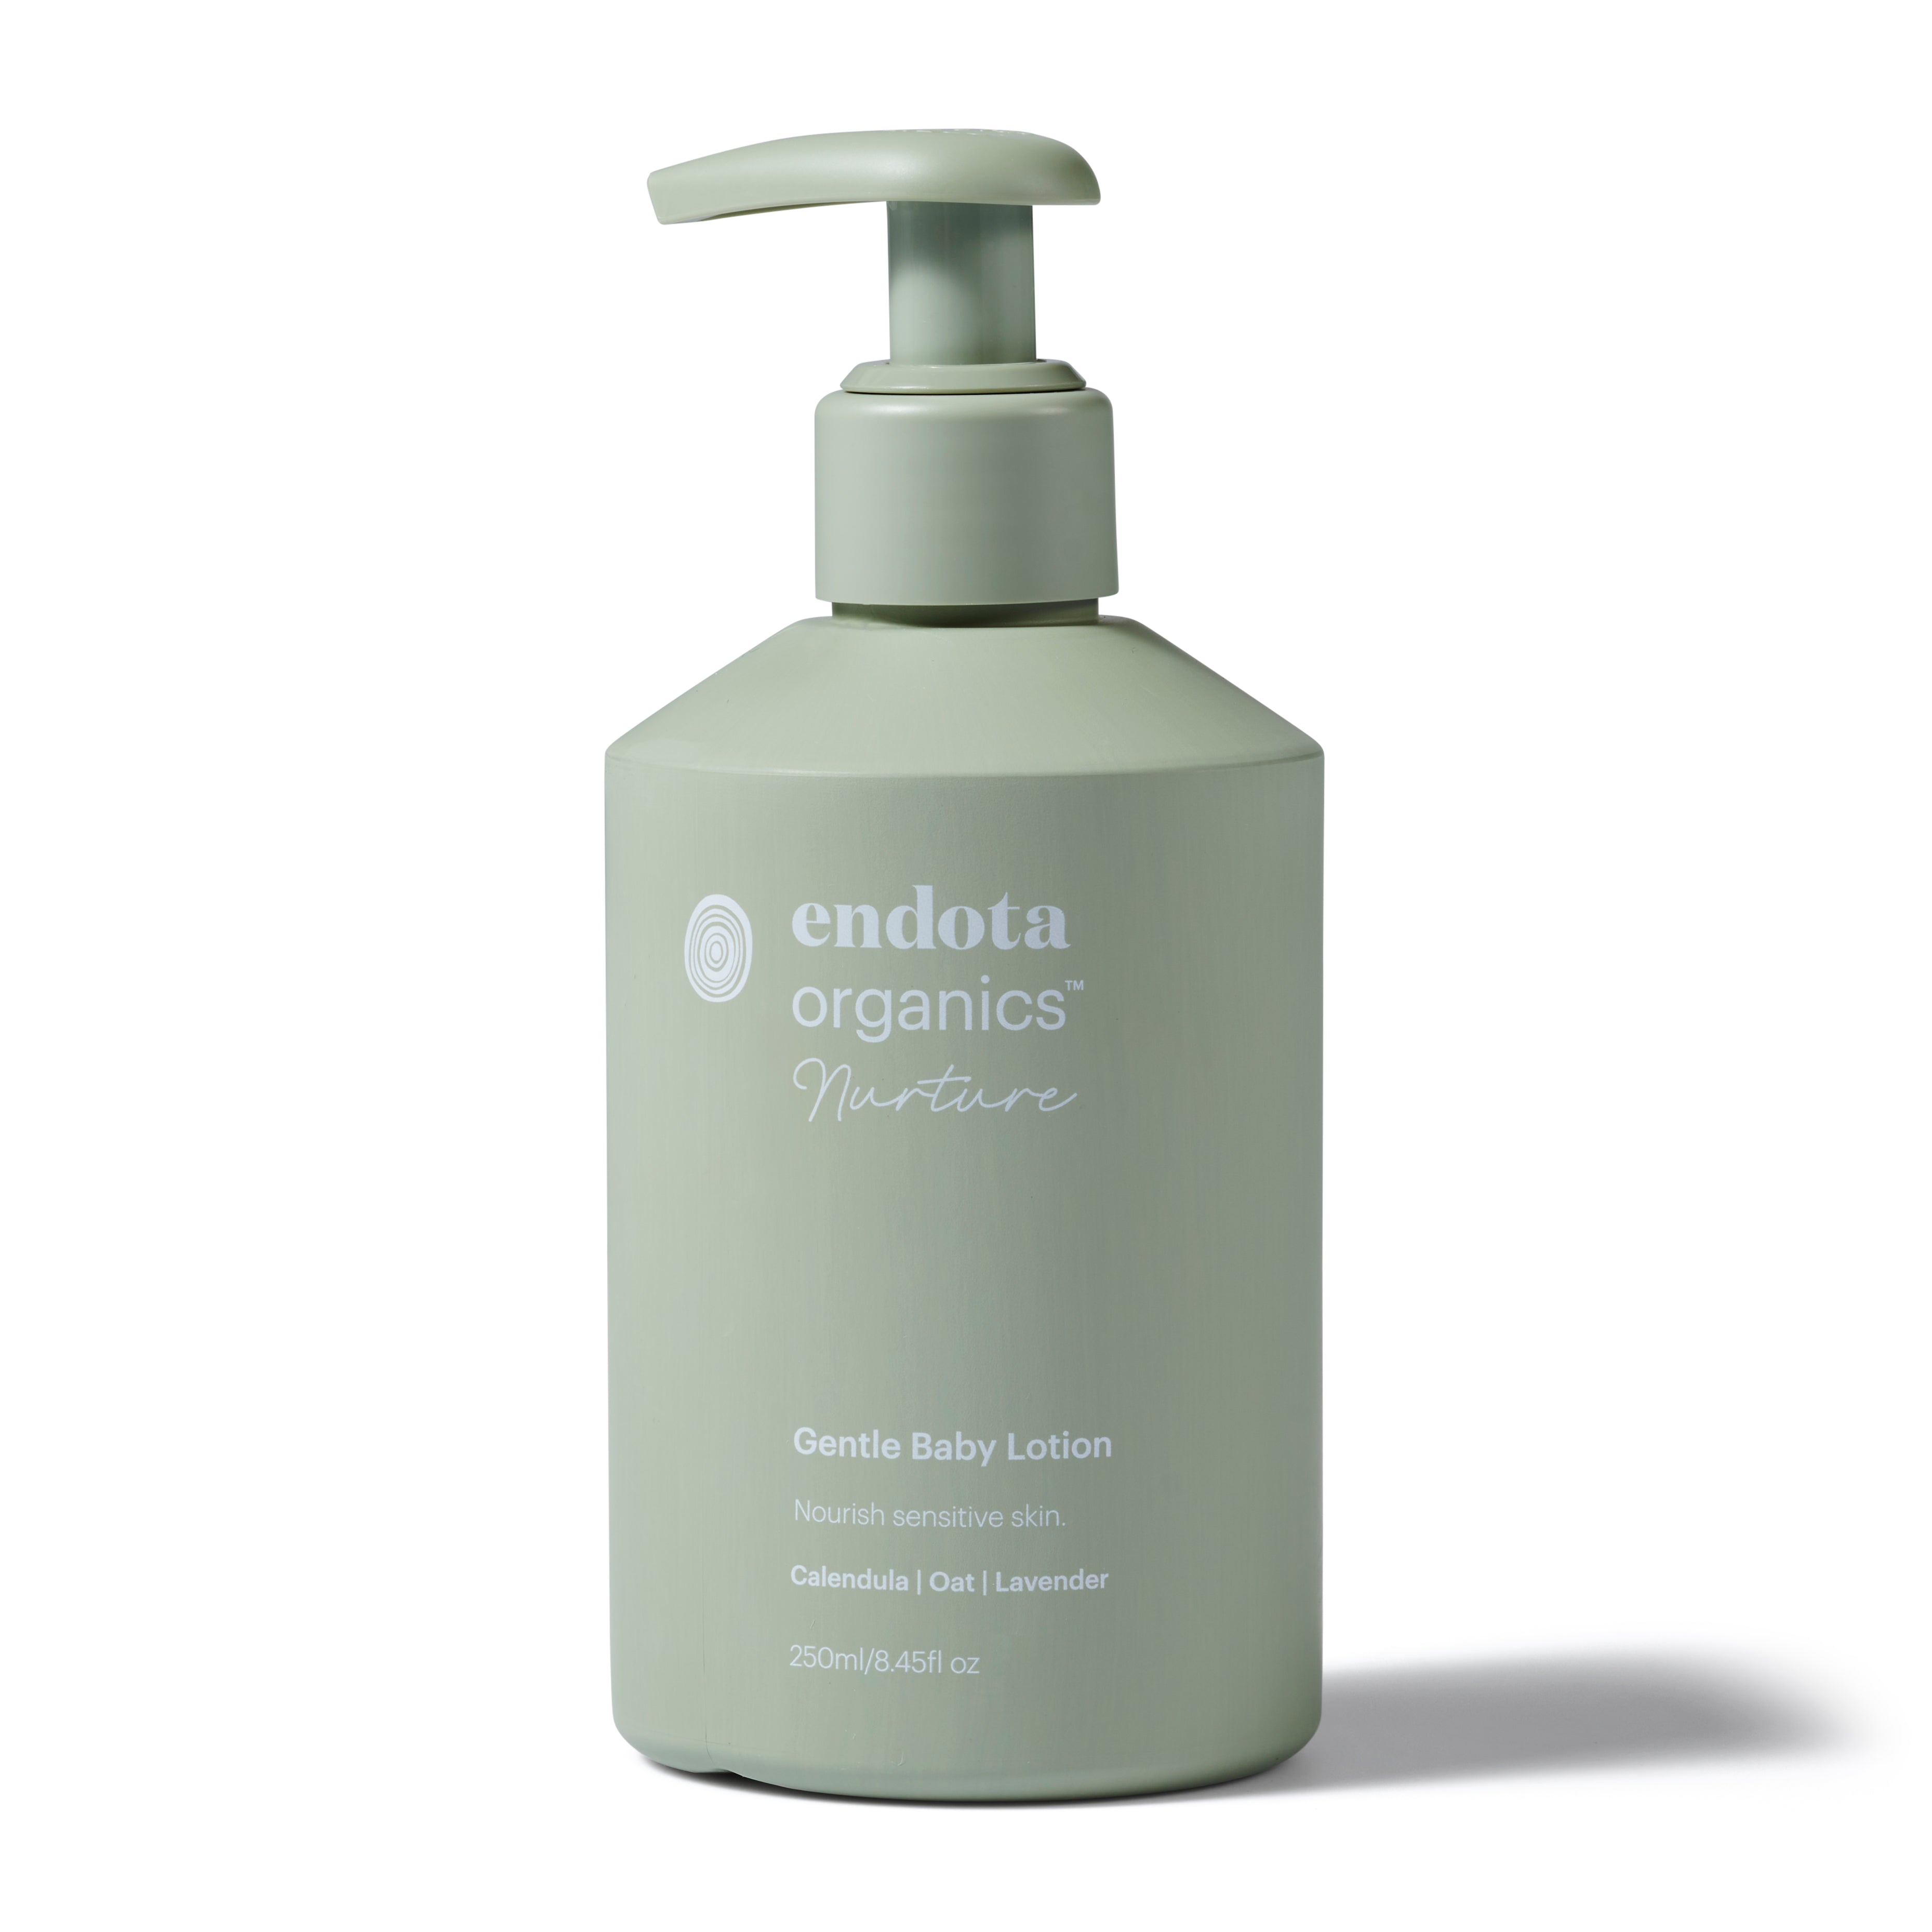 Nurture Gentle Baby Lotion by Endota | Purchase at The Green Collective